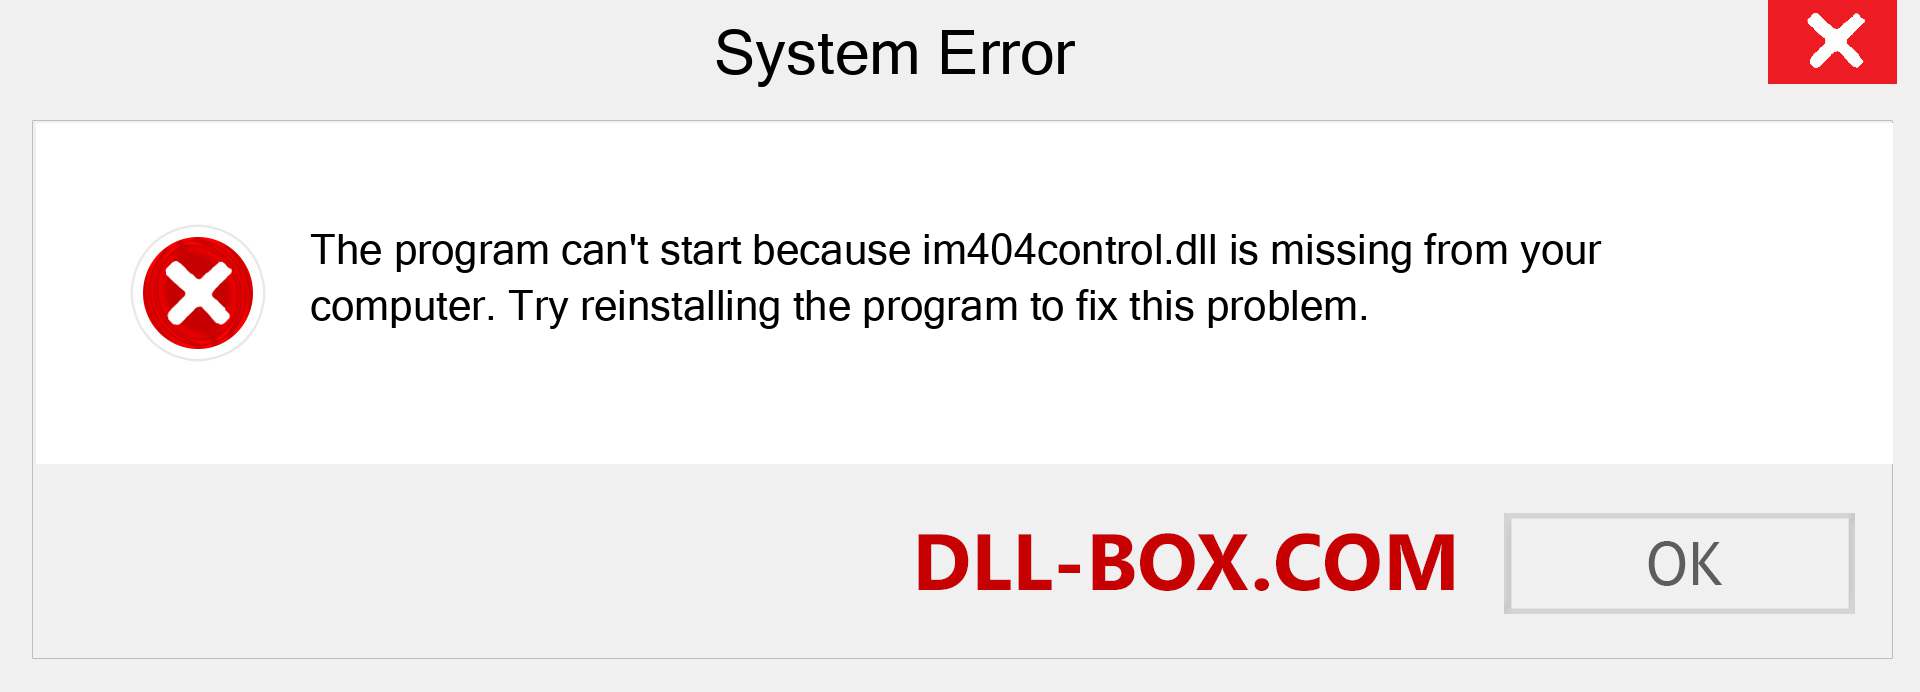  im404control.dll file is missing?. Download for Windows 7, 8, 10 - Fix  im404control dll Missing Error on Windows, photos, images